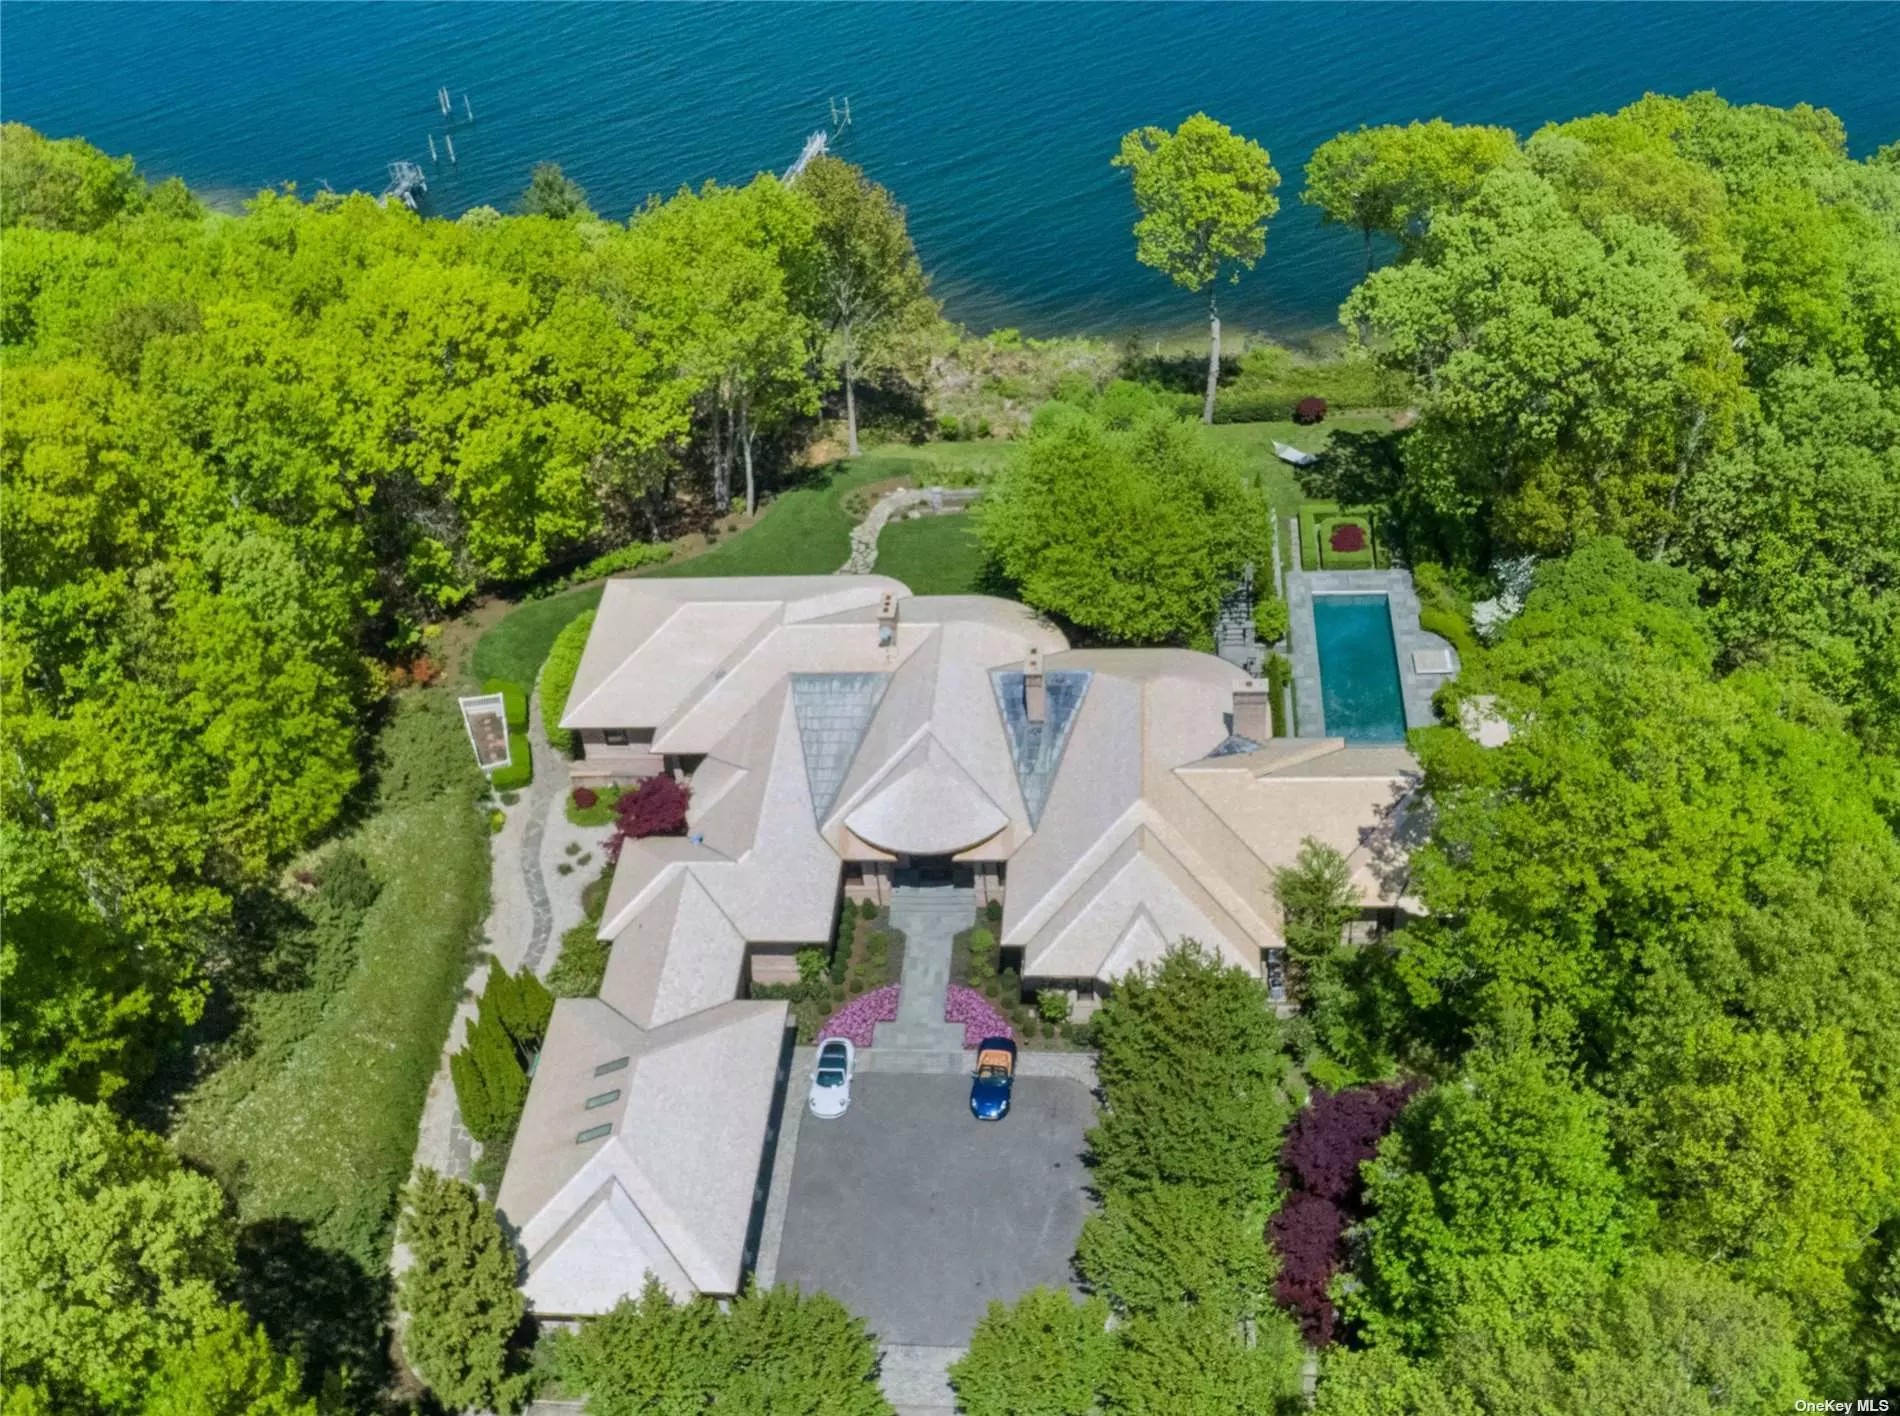 Tucked away on 7+ acres with 363 feet of waterfront property, this custom-built masterpiece by John Kean Development features exquisite craftsmanship and exceptional finishes throughout. Steps away from the original Tiffany Estate, this phenomenal residence boasts views of The Long Island Sound, Cold Spring Harbor, and Lloyd Harbor from its 90-foot covered deck. Outdoors is designed for elegant entertaining and features a pool and spa, pavilion, a tennis court, beach house, and an application has been submitted for a dock.